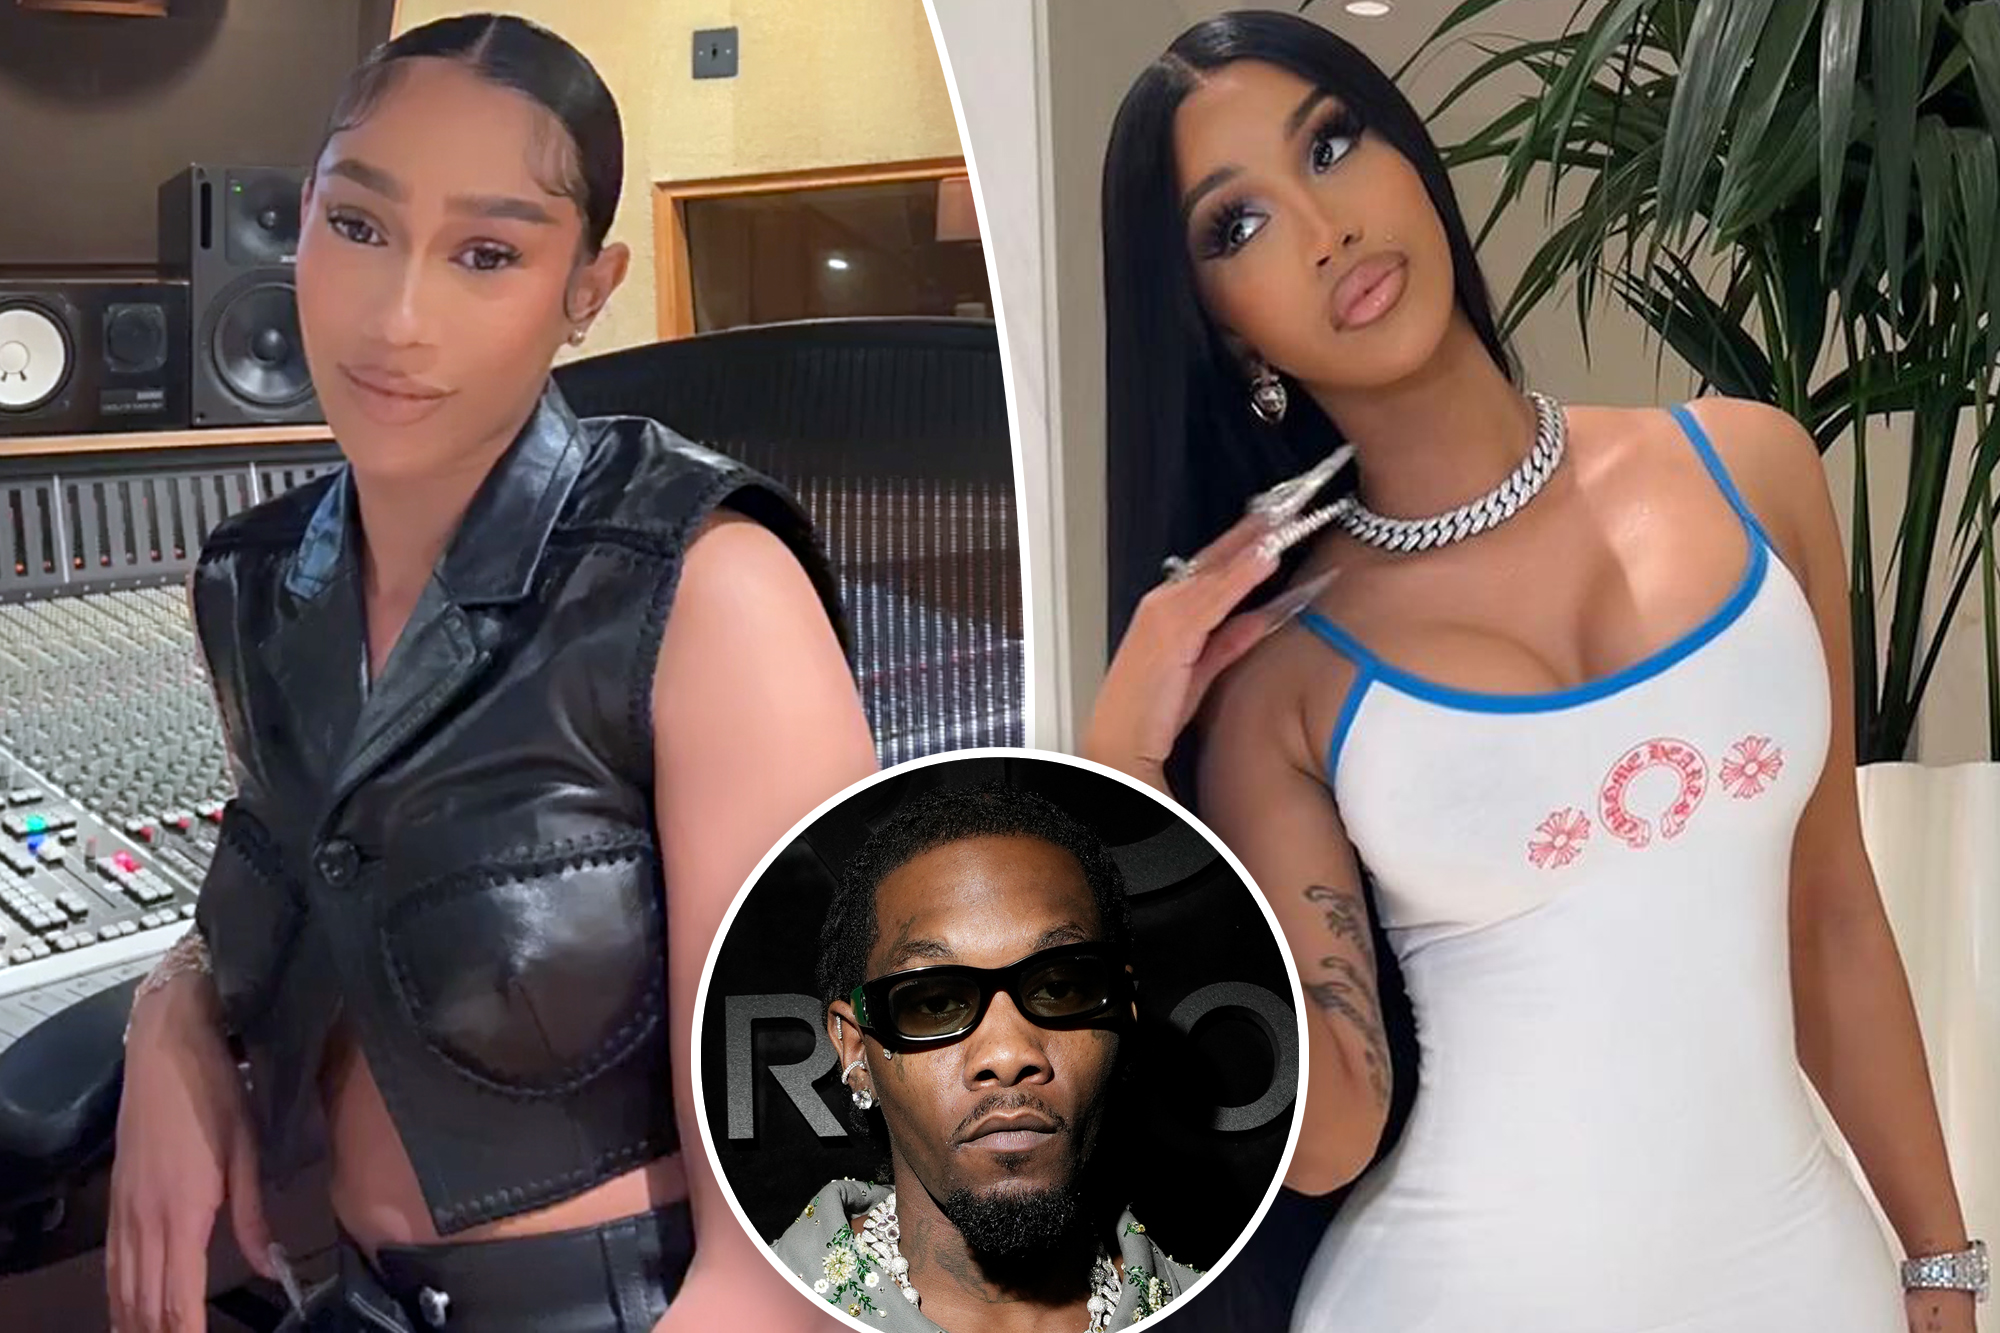 Rapper Bia slams Cardi B in new diss song, claims Offset cheated on her in their home